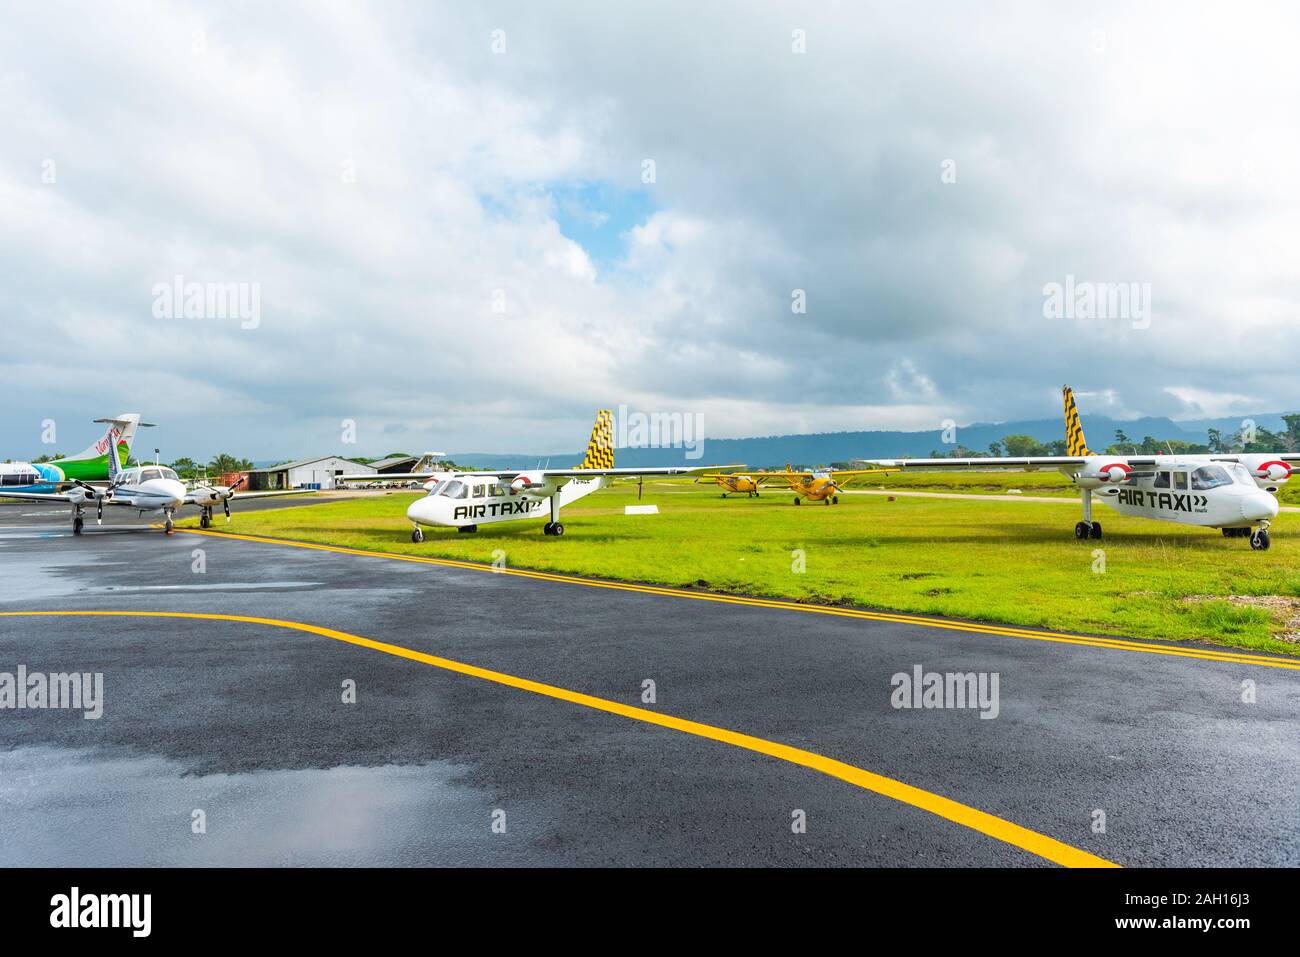 PORTVILA, VANUATU - JULY 19, 2019: Airplanes at the airport against the backdrop of a mountain landscape. Copy space for text Stock Photo